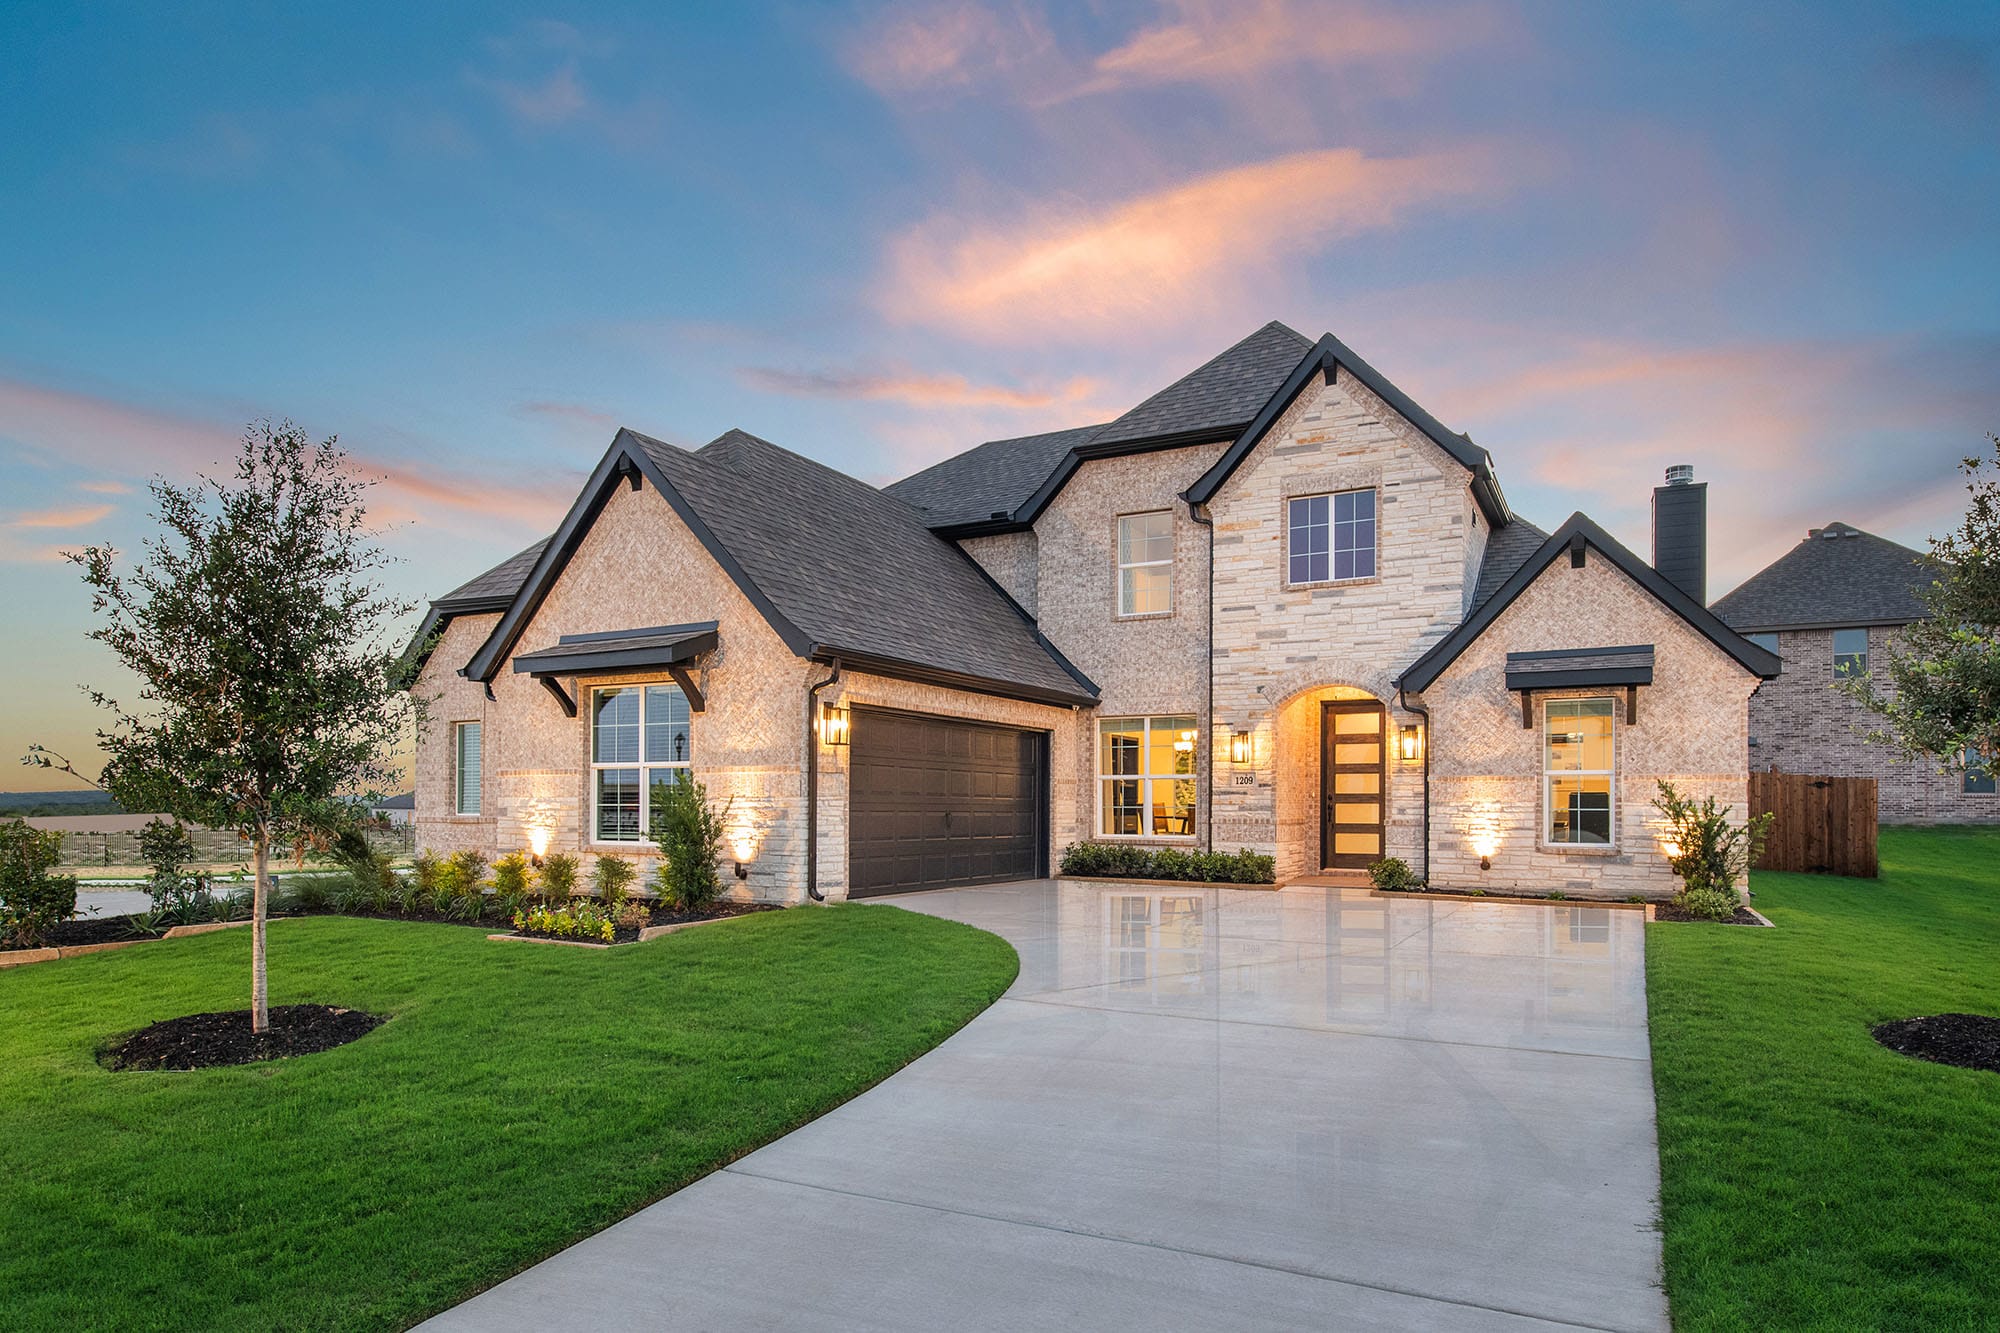 Elevation C with Stone | Concept 2972 at Villages of Walnut Grove in Midlothian, TX by Landsea Homes